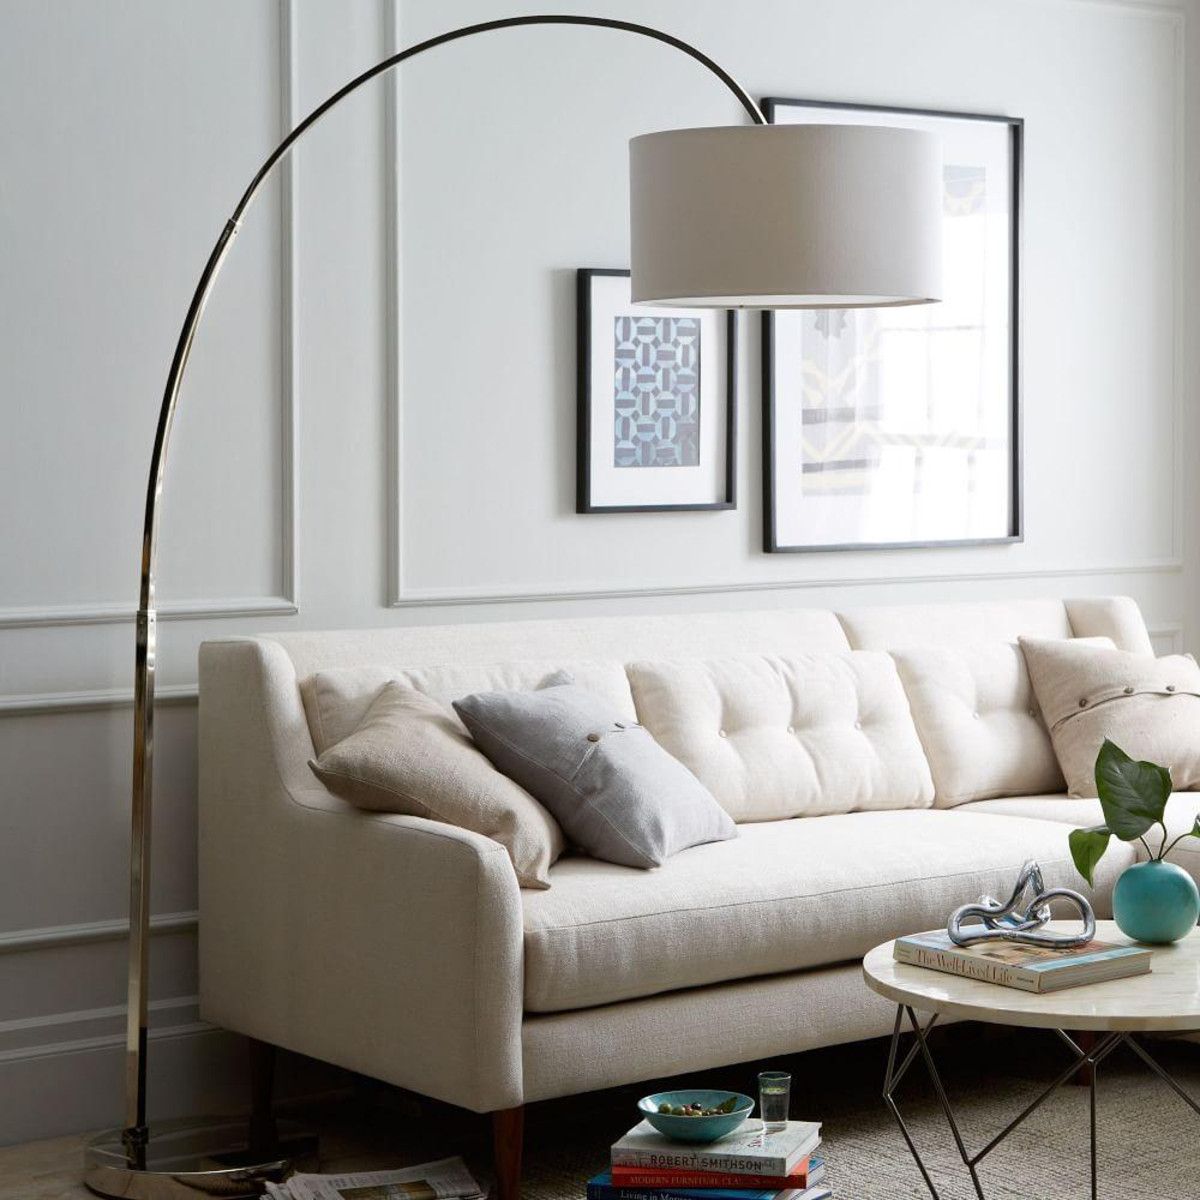 Overarching Floor Lamp Room Disacode Home Design From pertaining to dimensions 1200 X 1200